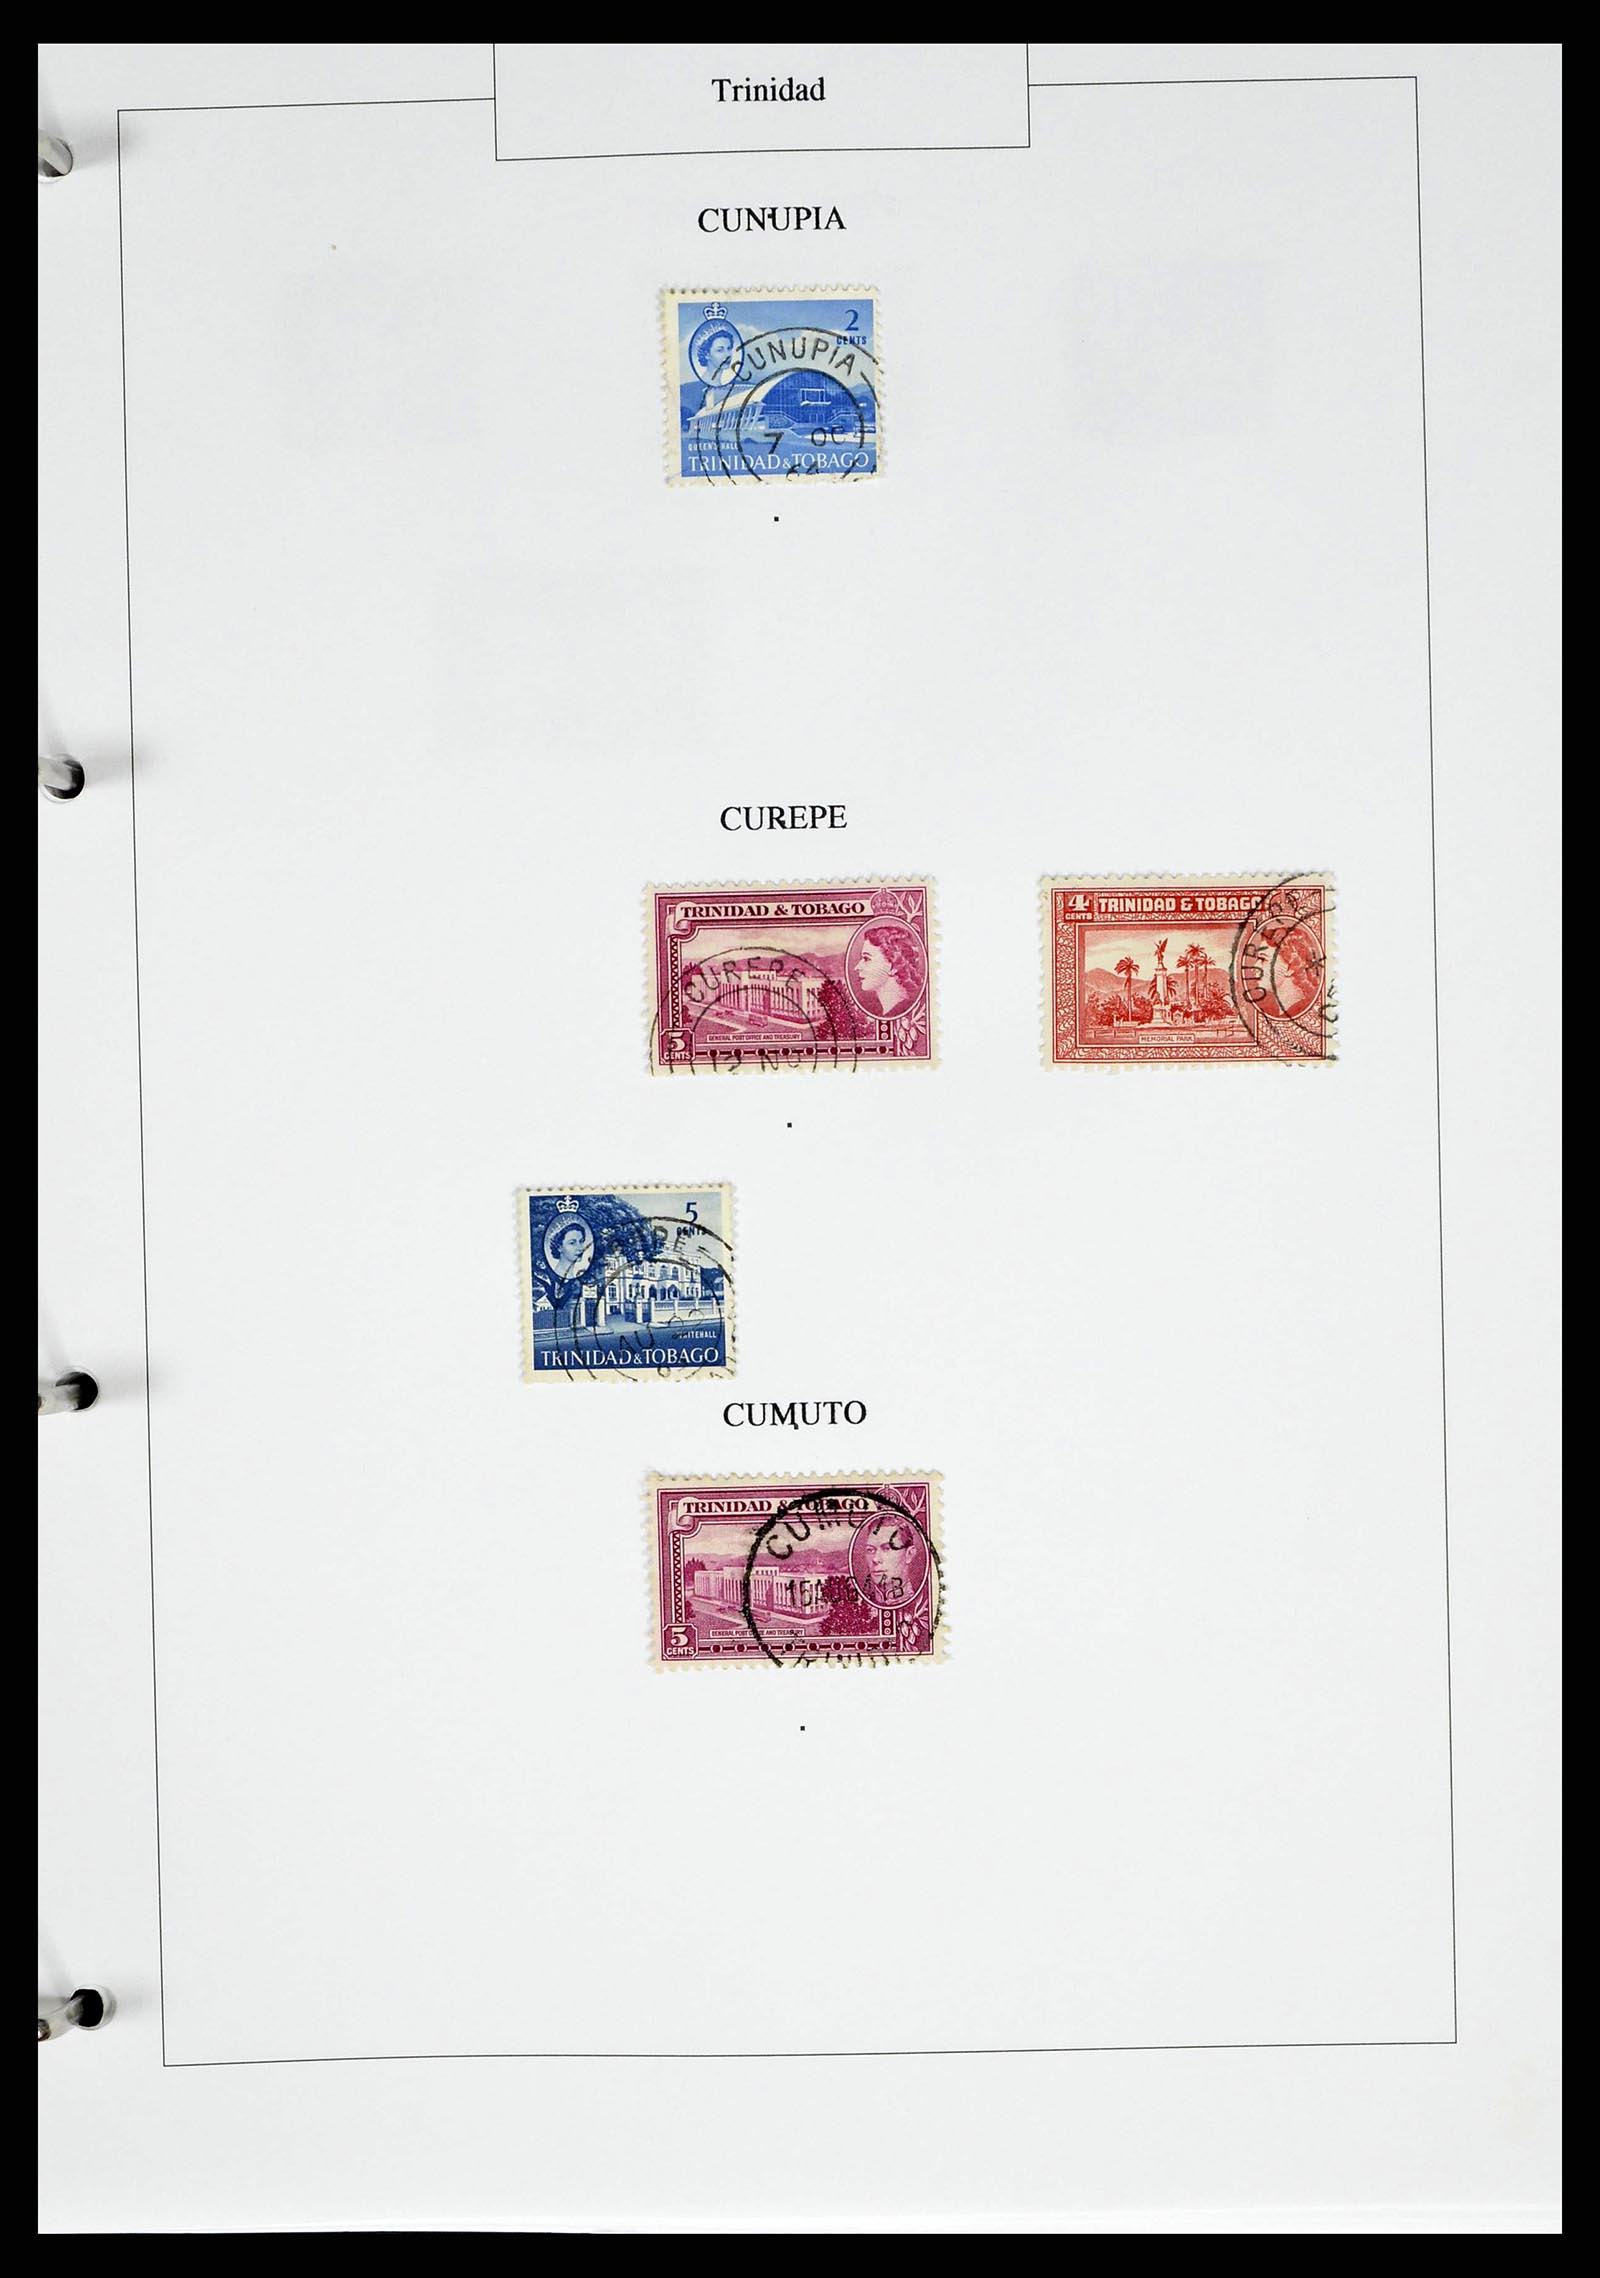 38481 0024 - Stamp collection 38481 Trinidad and Tobago cancels 1859-1960.